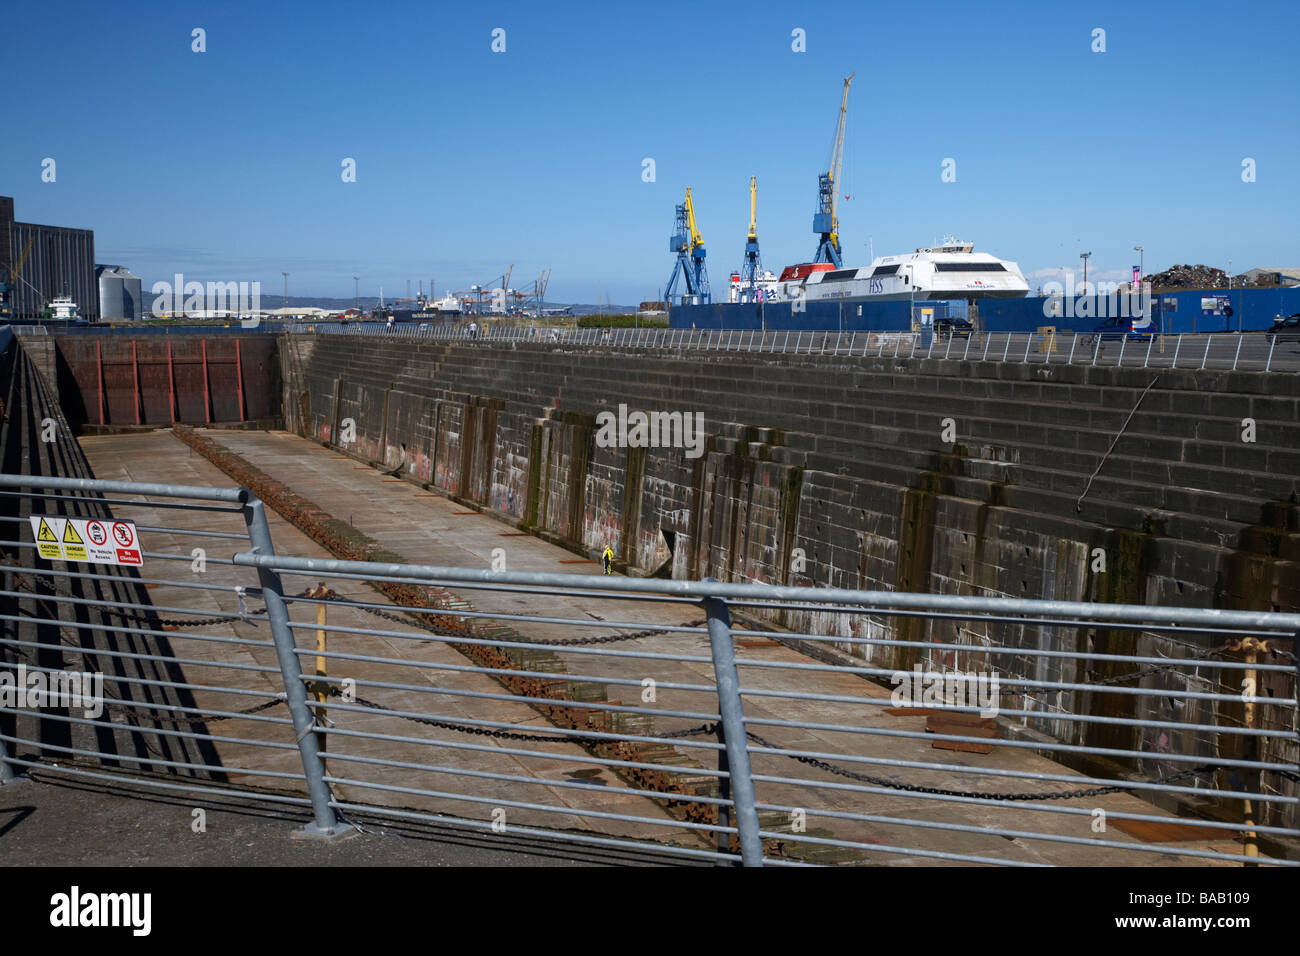 former thompsons dry graving dock where the titanic was built in titanic quarter queens island belfast northern ireland uk Stock Photo